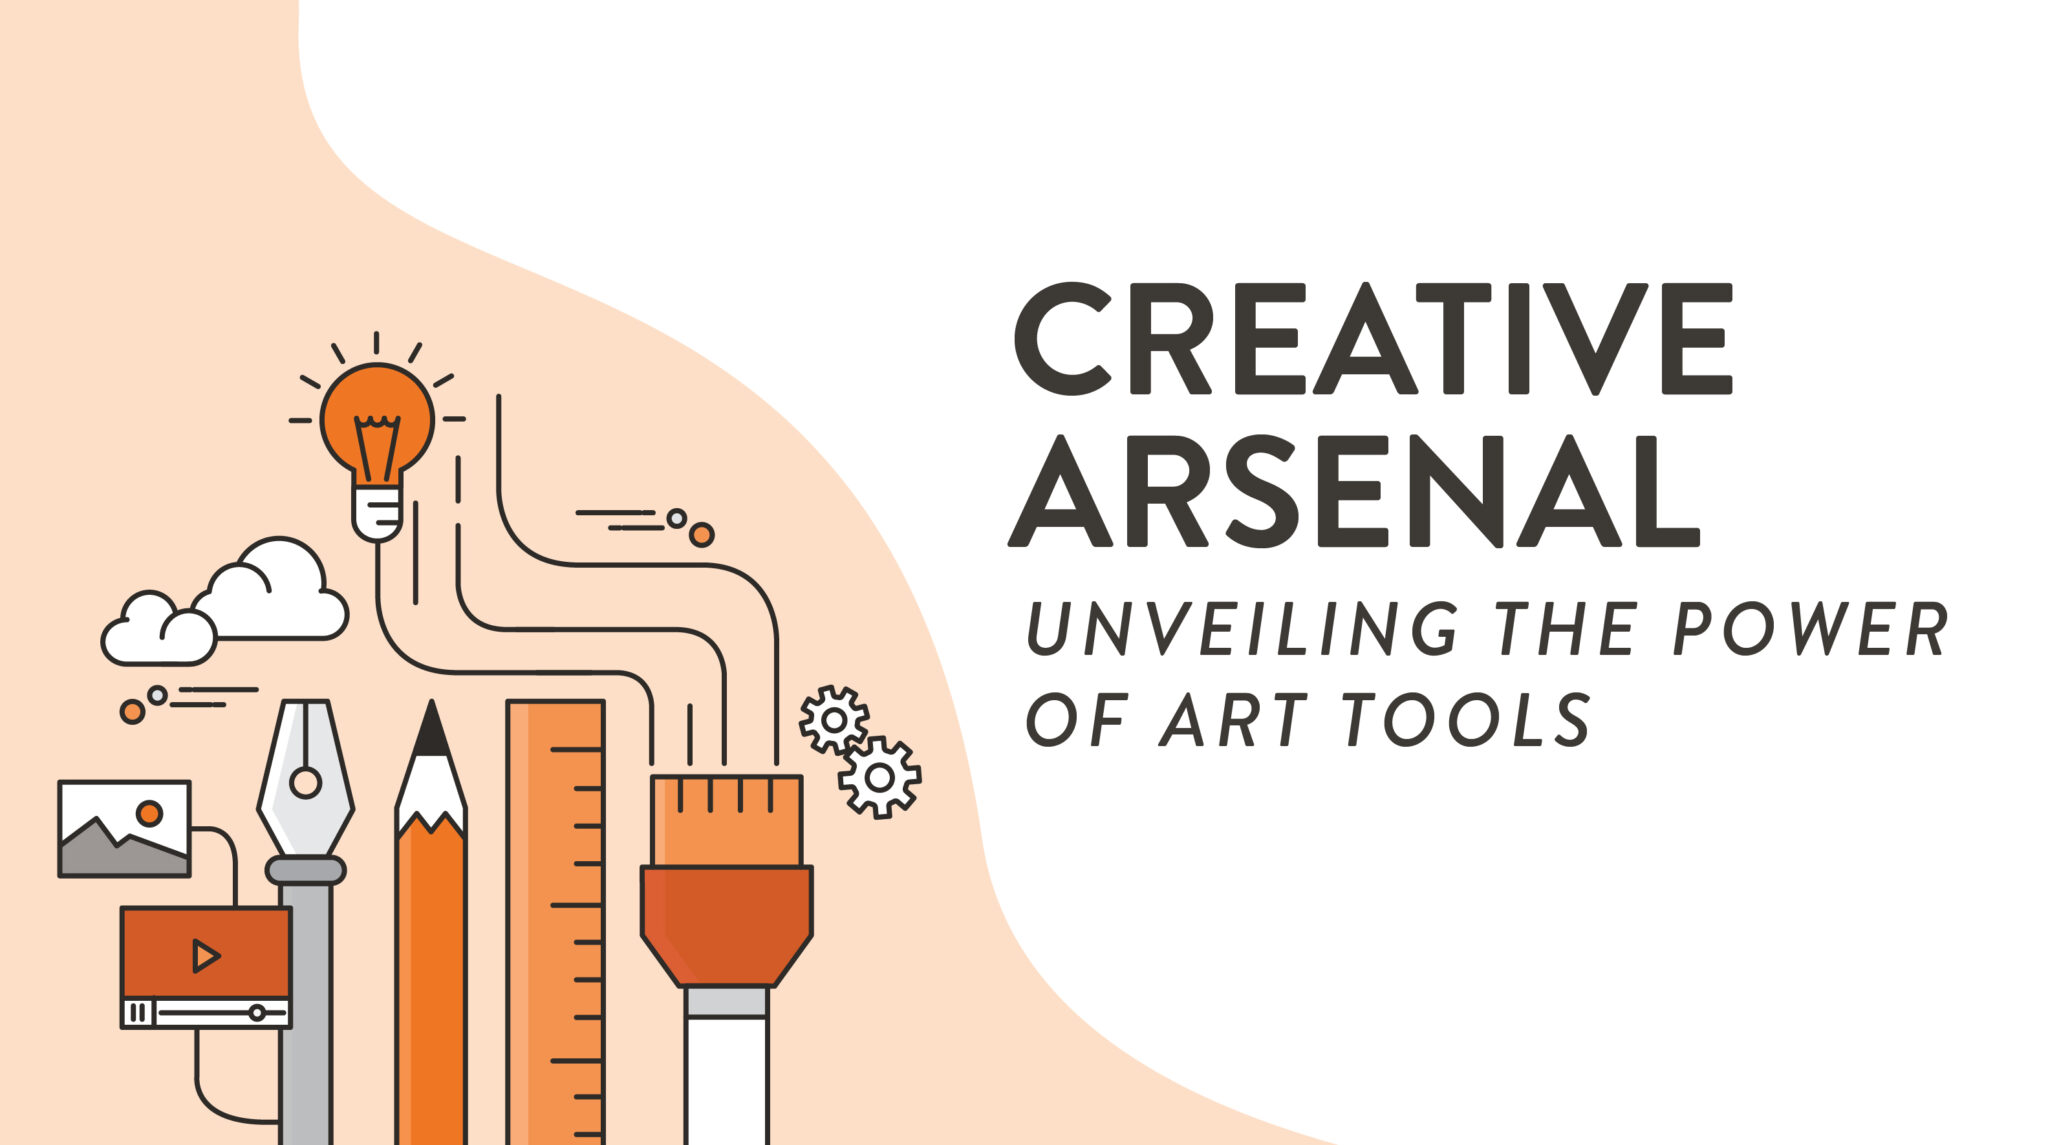 Creative-Arsenal-unveiling-the-power-of-art-tools